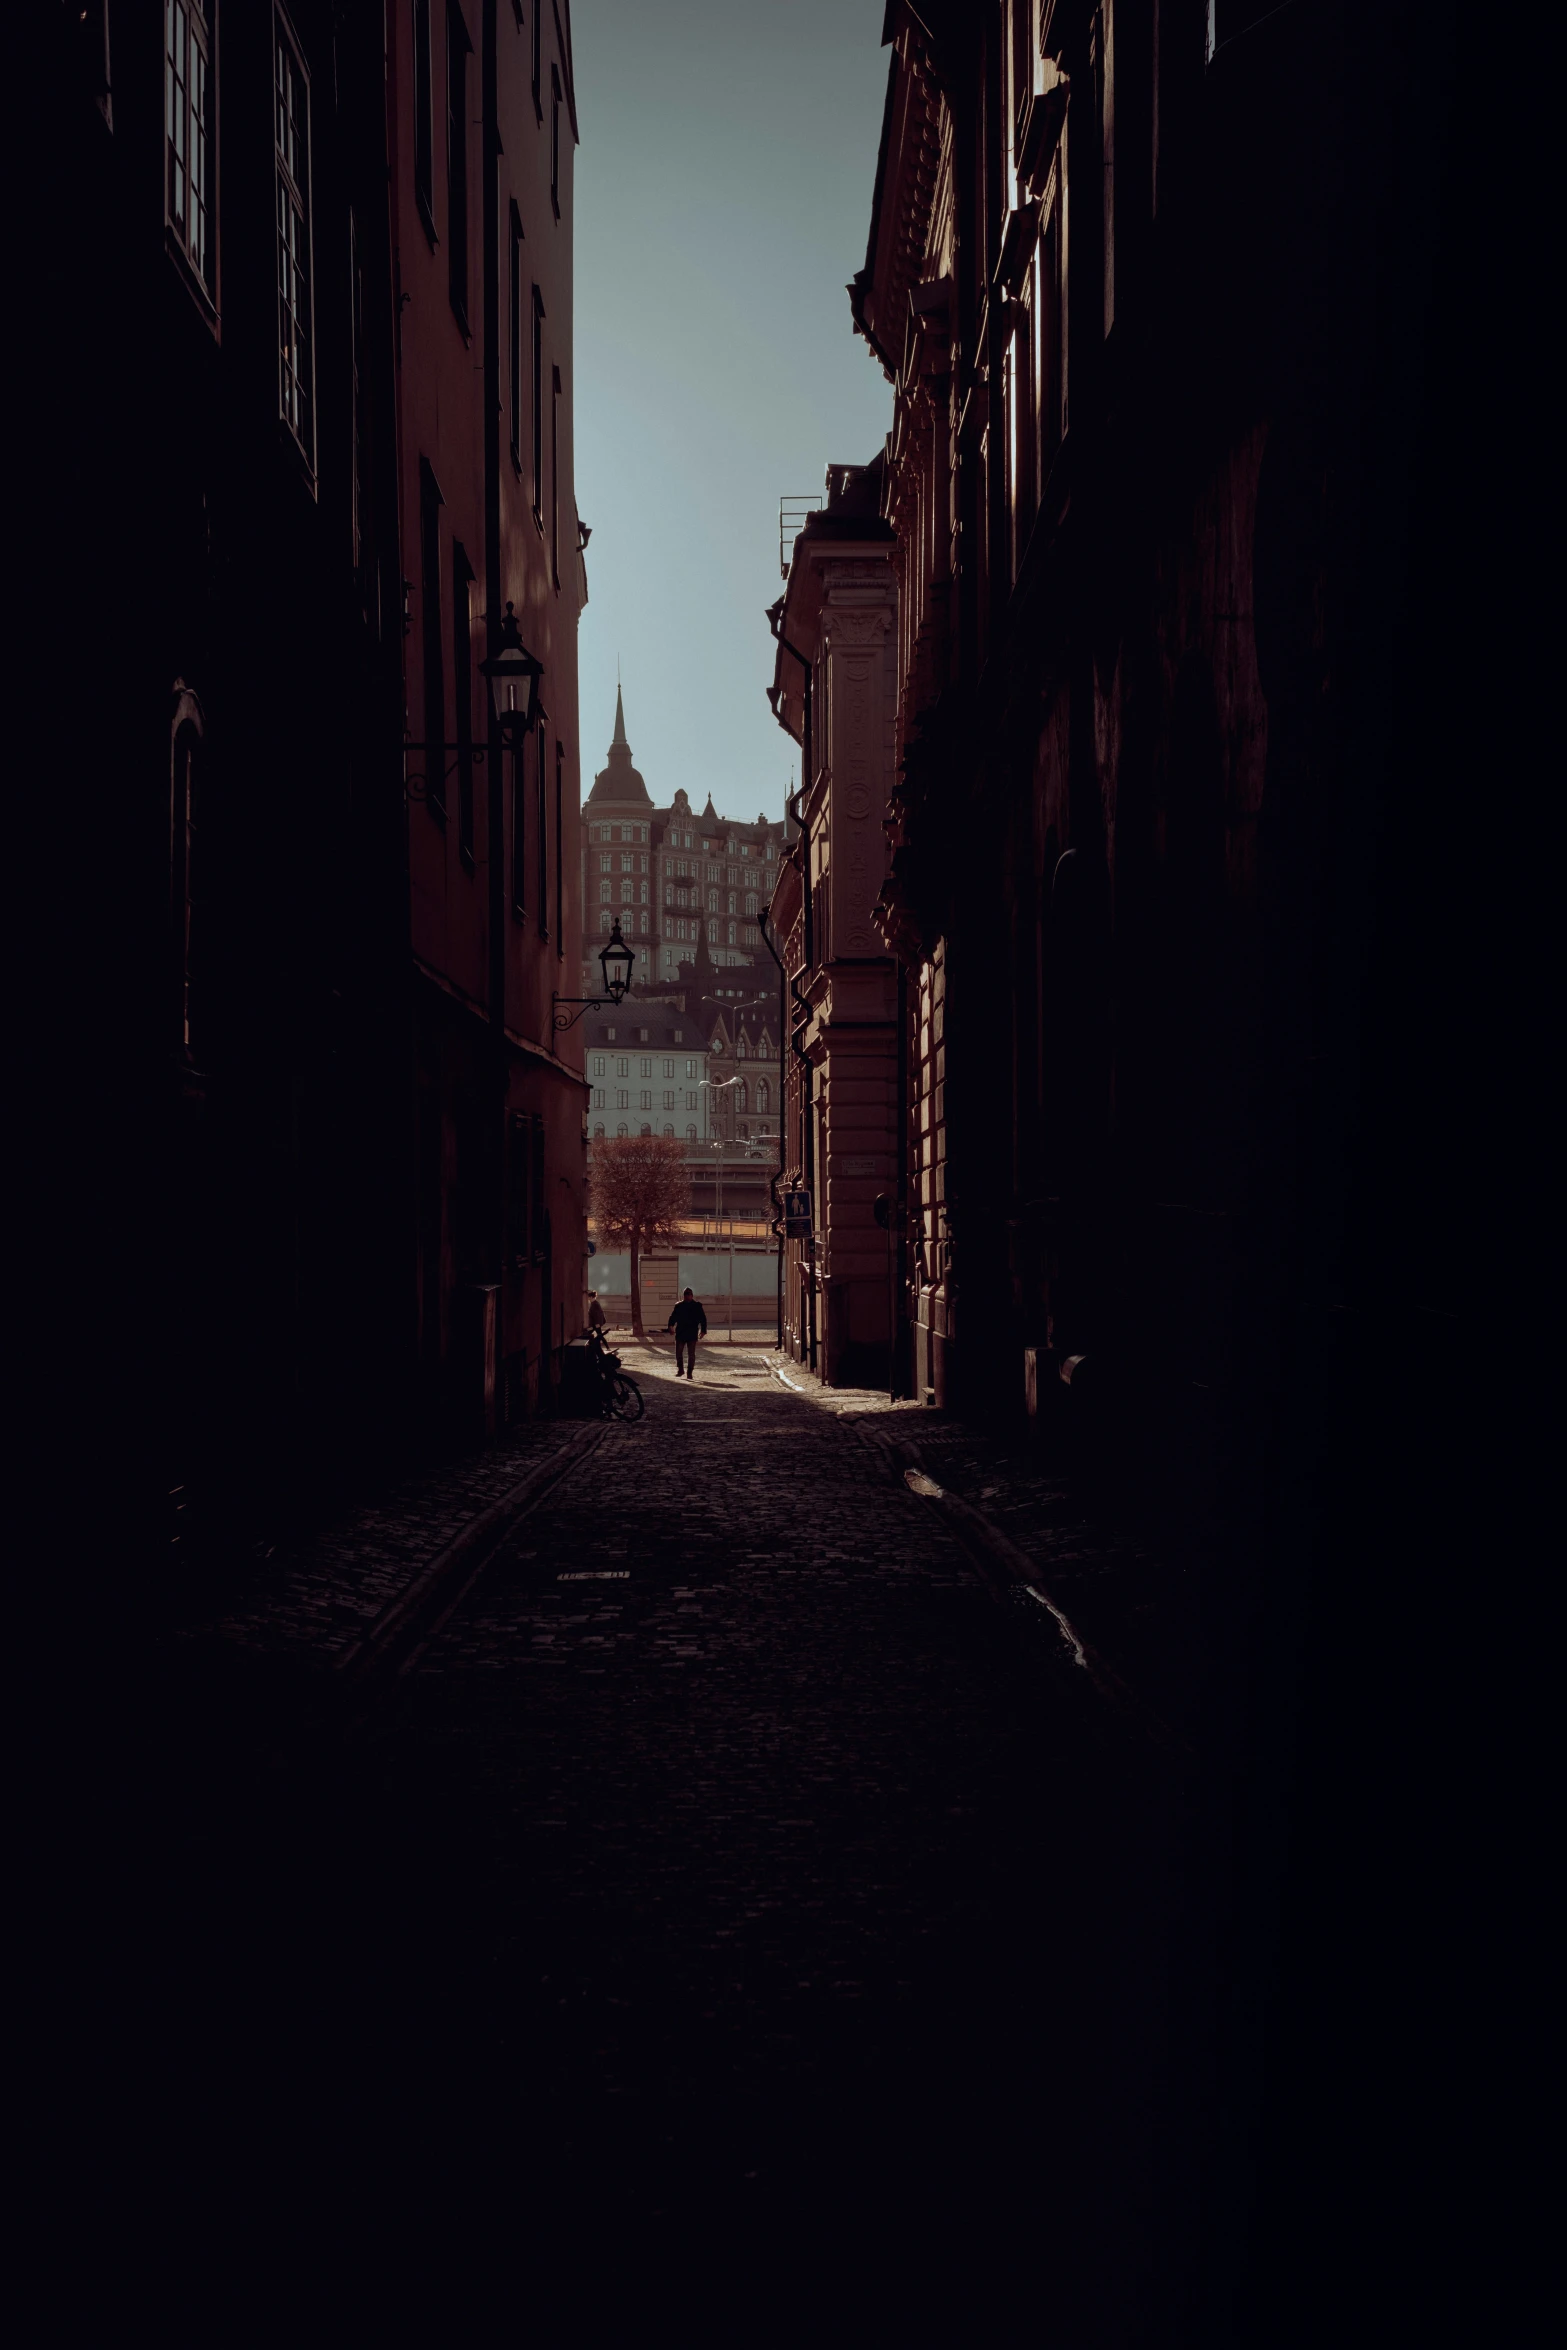 the shadow of an alley in an old city